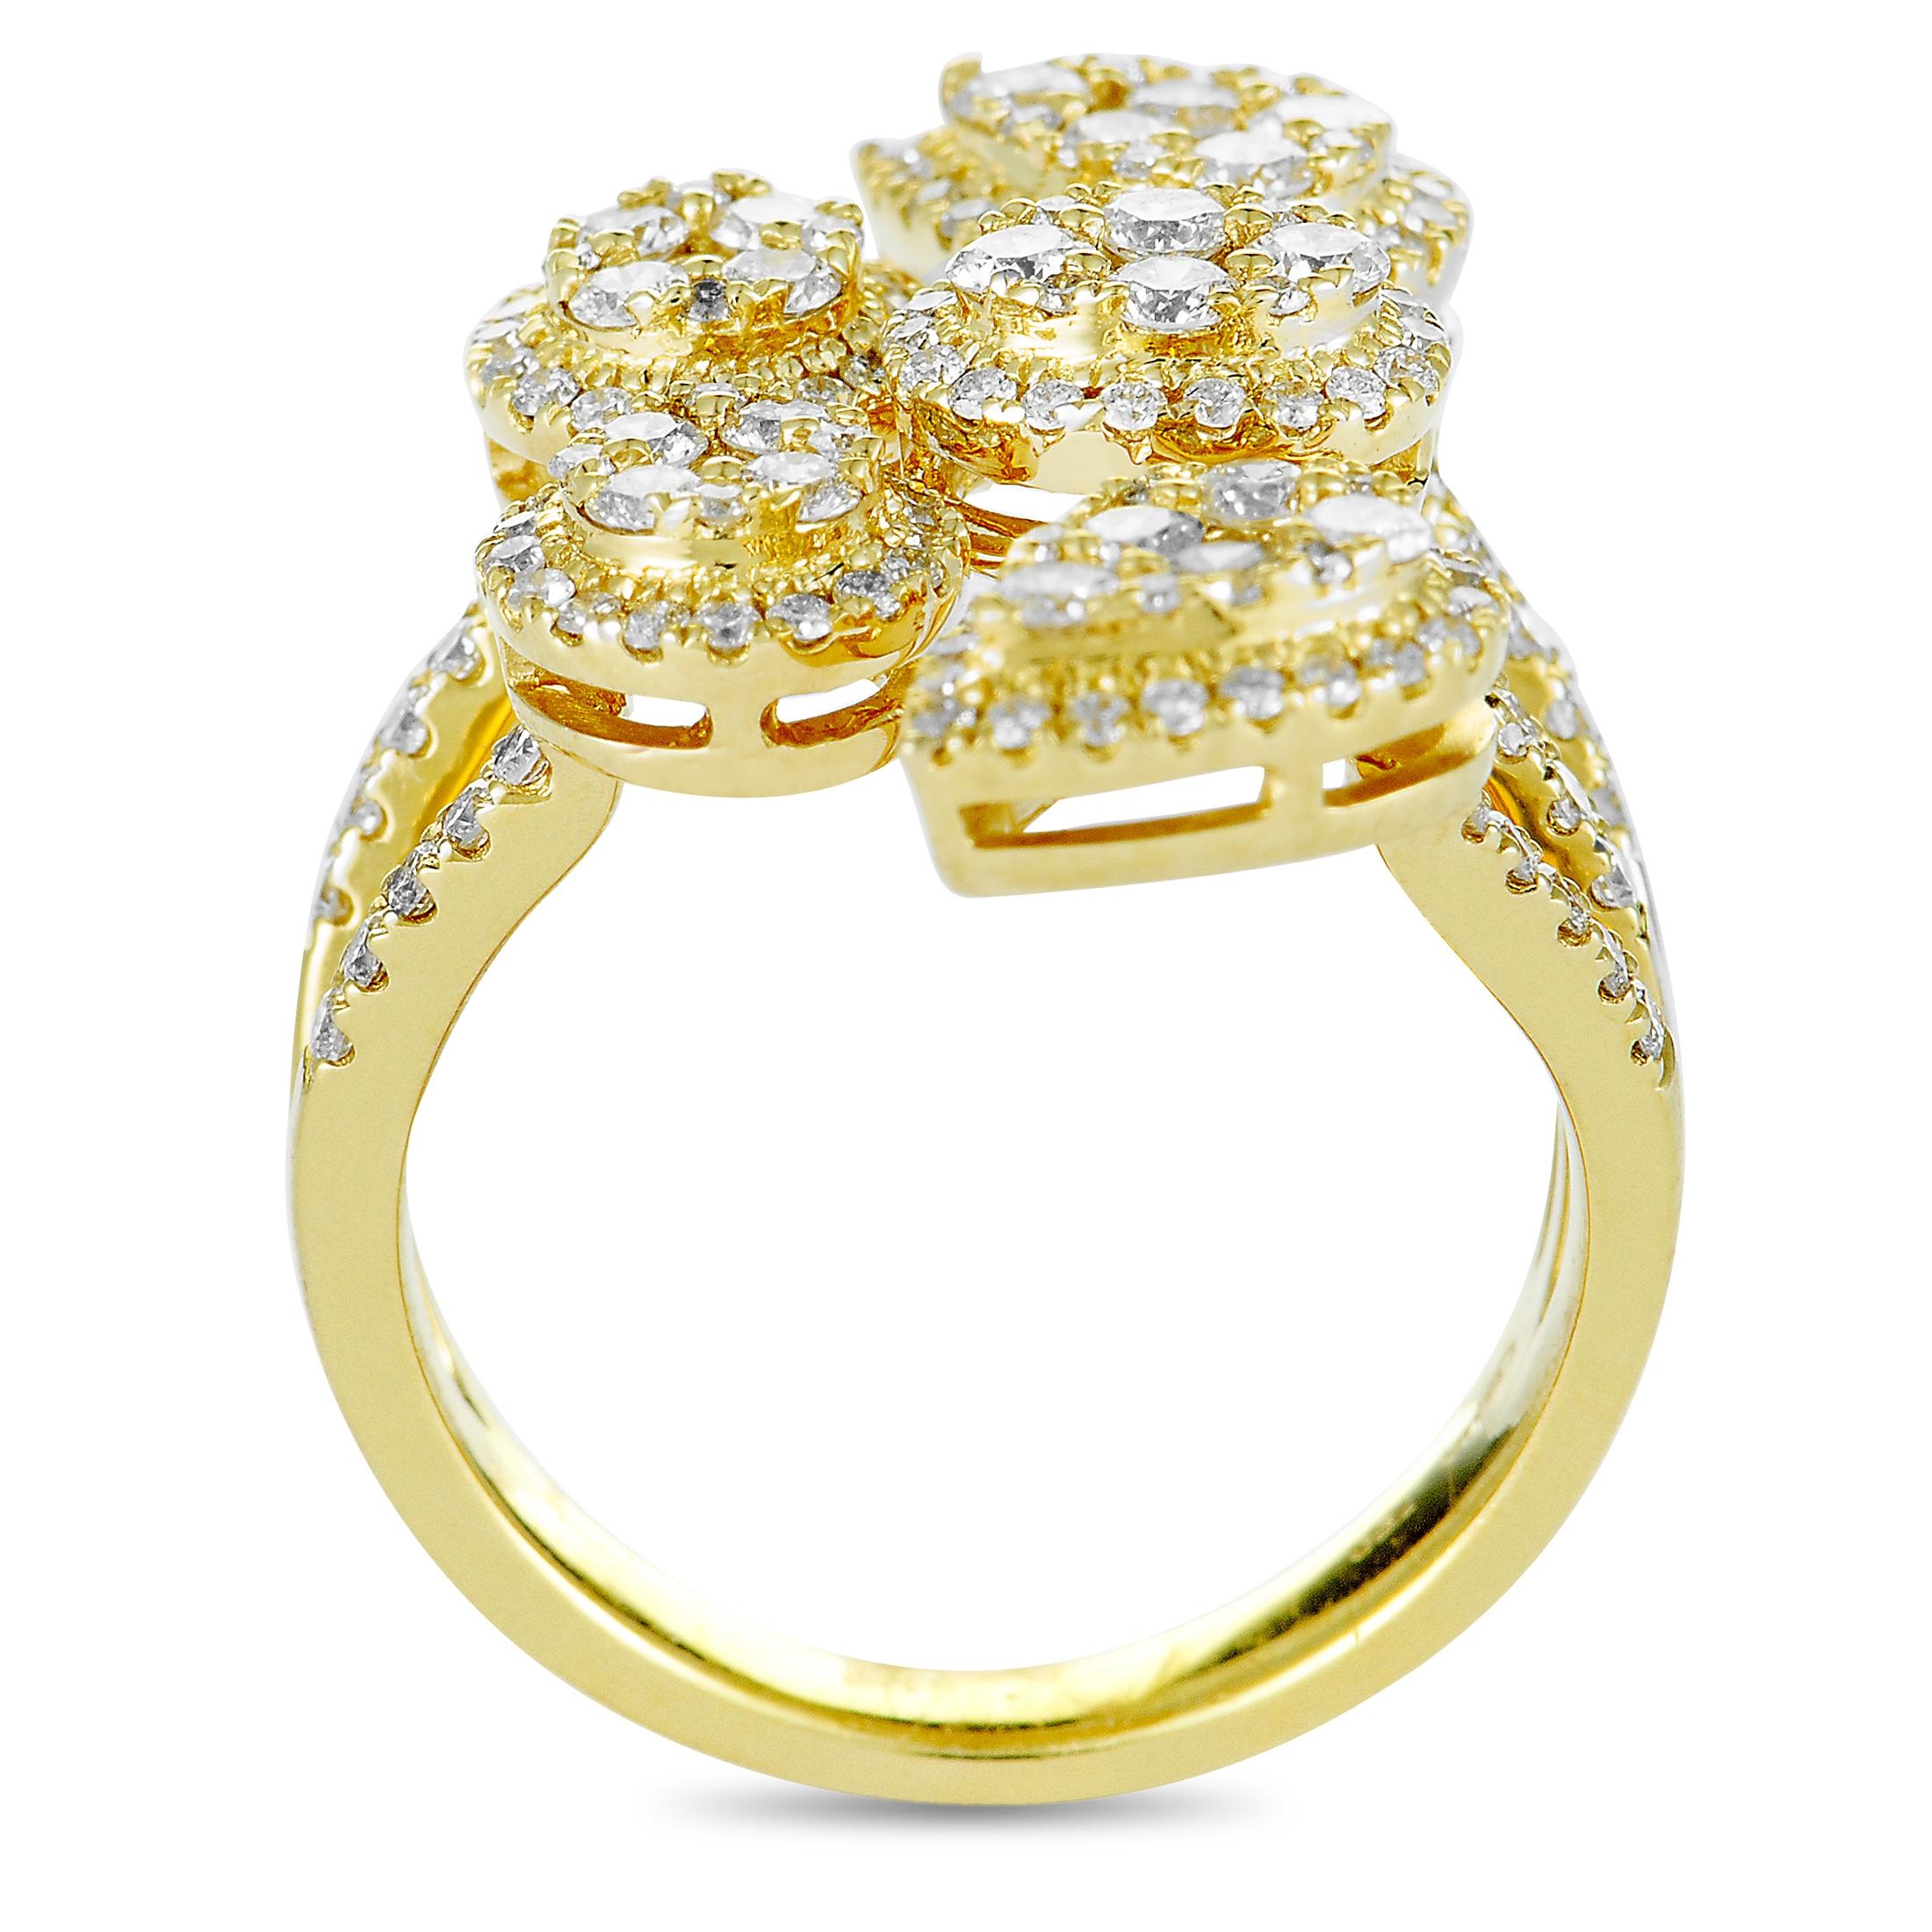 This LB Exclusive ring is made of 18K yellow gold and set with diamonds that amount to 1.50 carats. The ring weighs 8.1 grams, boasting band thickness of 3 mm and top height of 4 mm, while top dimensions measure 20 by 23 mm.

Offered in brand new